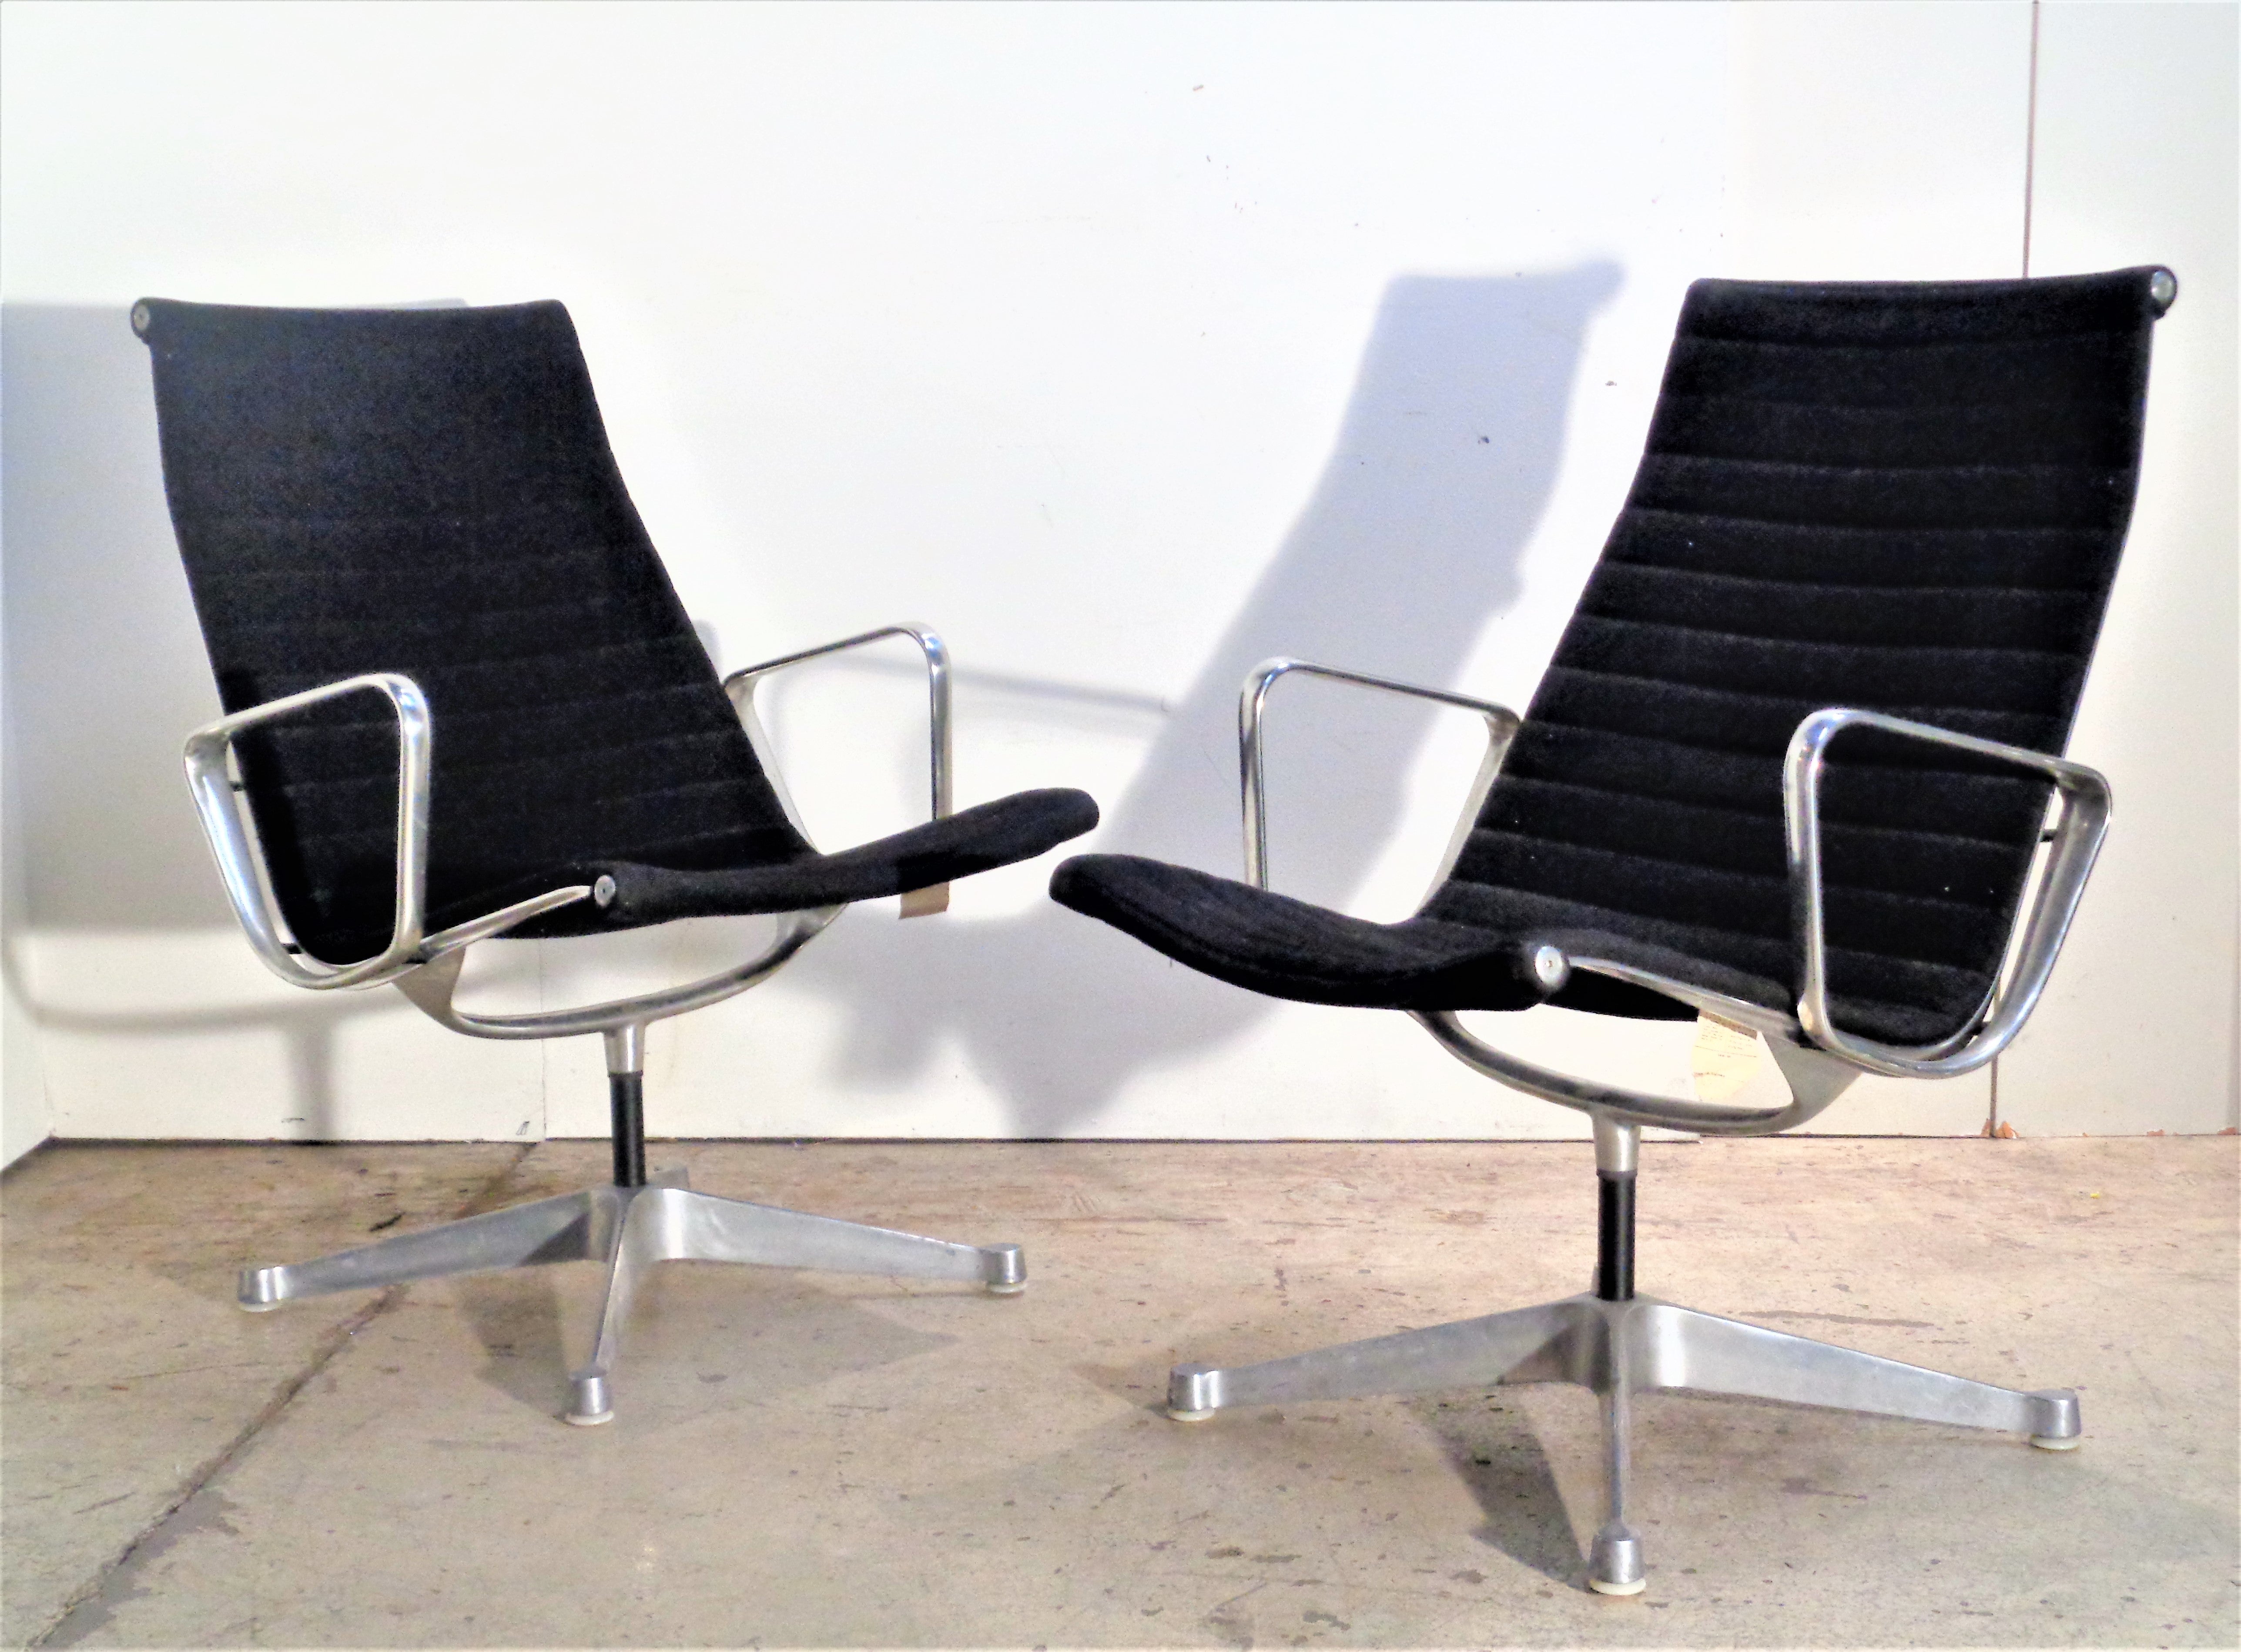 Pair of aluminum group armchairs designed by Charles and Ray Eames for Herman Miller in all original vintage condition w/ four star swivel base, nylon foot pads, black wool upholstery. Stamped signed into underside aluminum metal and with tag (